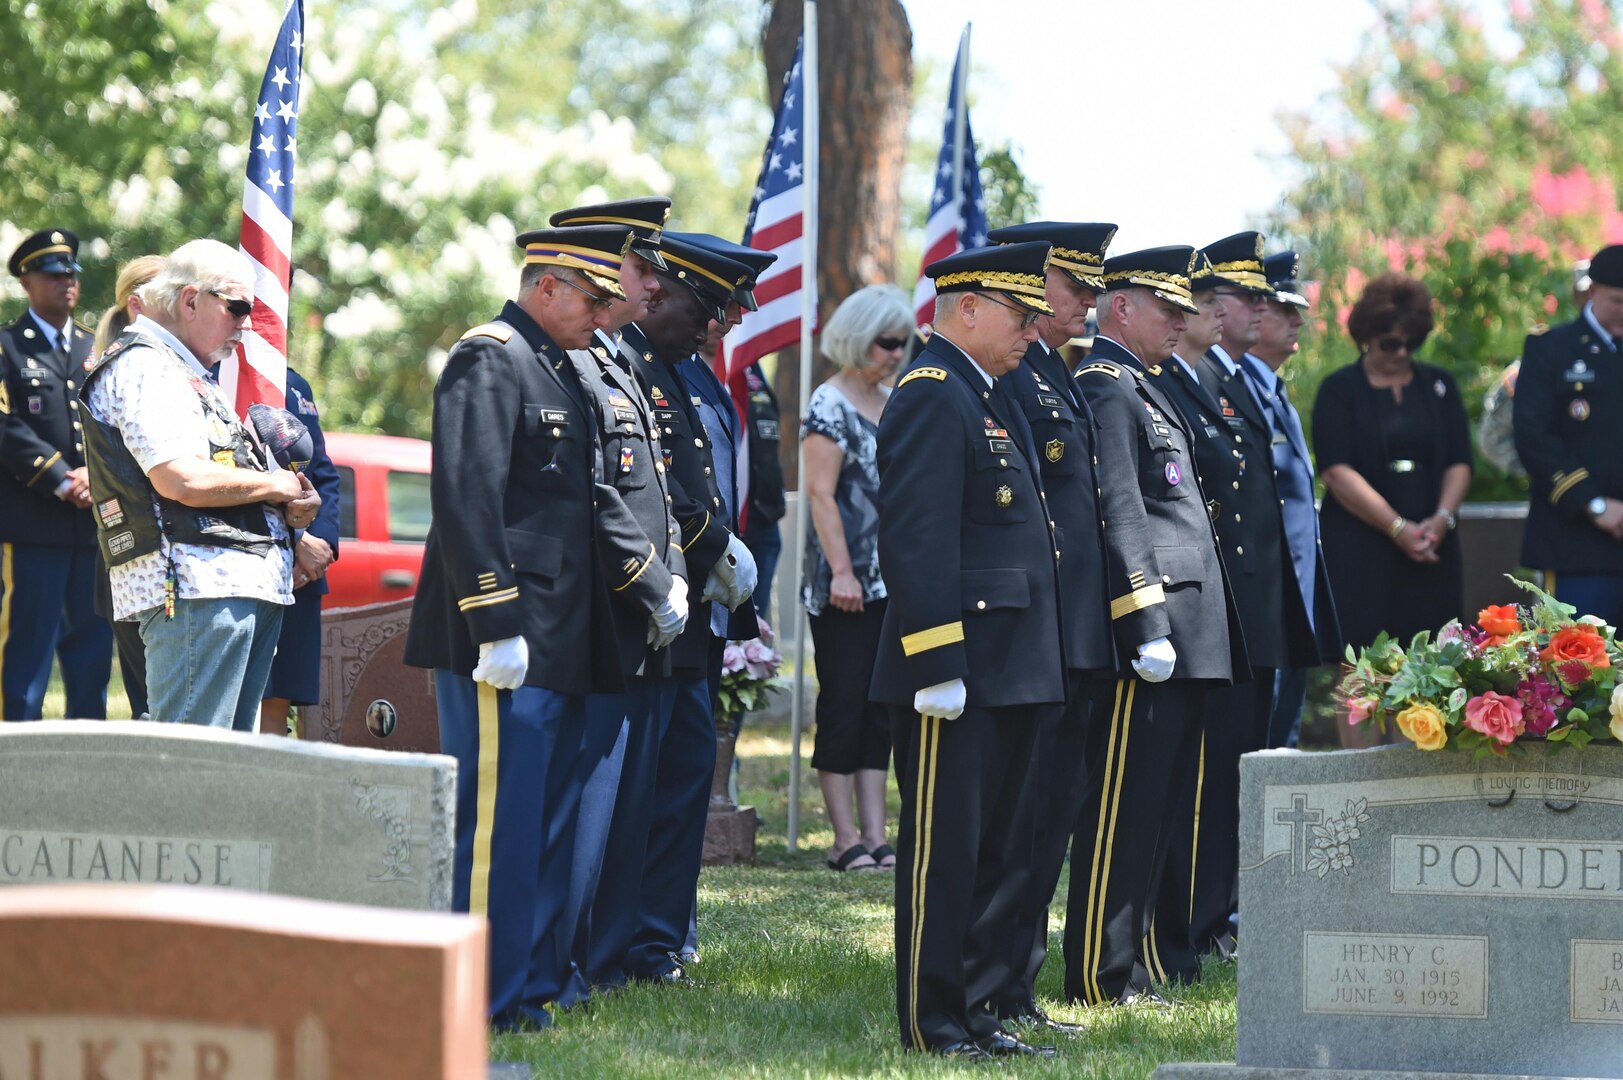 Gen. Frank Grass, chief of the National Guard Bureau, with members of the Louisiana National Guard’s command group render honors to retired Maj. Gen. Ansel M. Stroud, Jr., during his interment July 7, 2016 at Forest Park Cemetery, Shreveport, La. Maj. Gen. Stroud was the adjutant general of LANG from 1980 – 1997, and served under four governors in La.